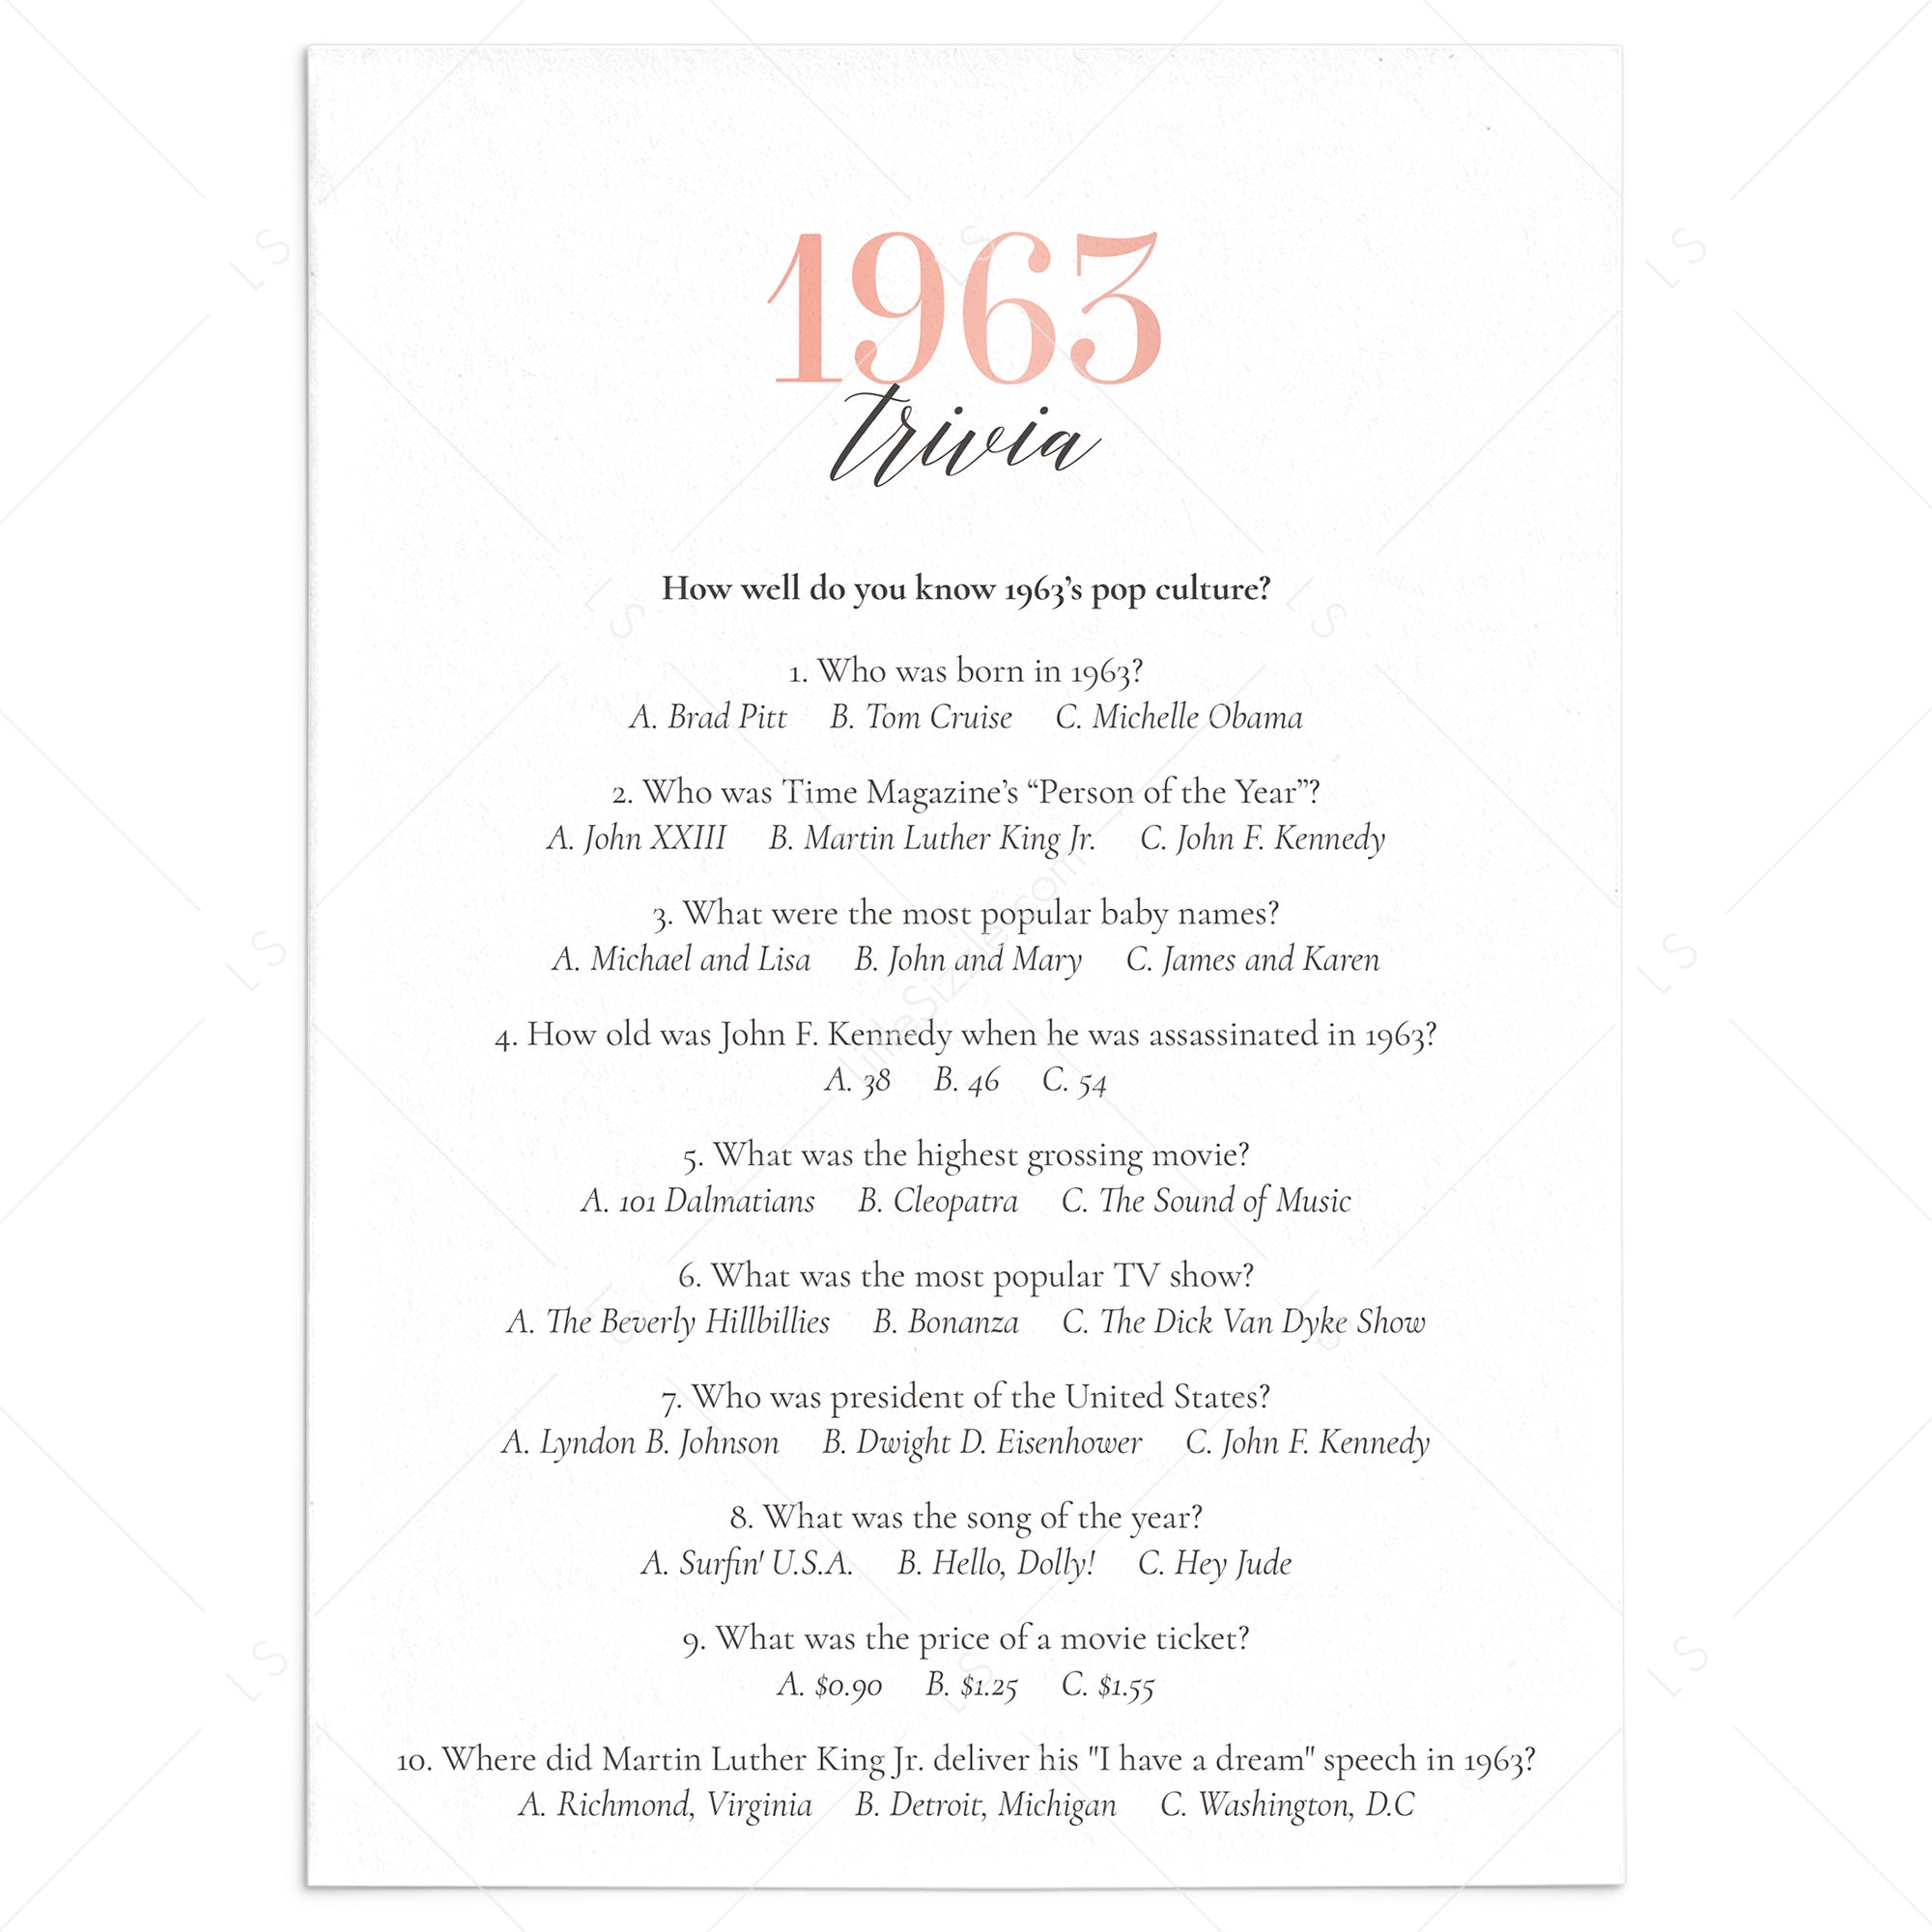 1963 Trivia Questions and Answers Printable by LittleSizzle